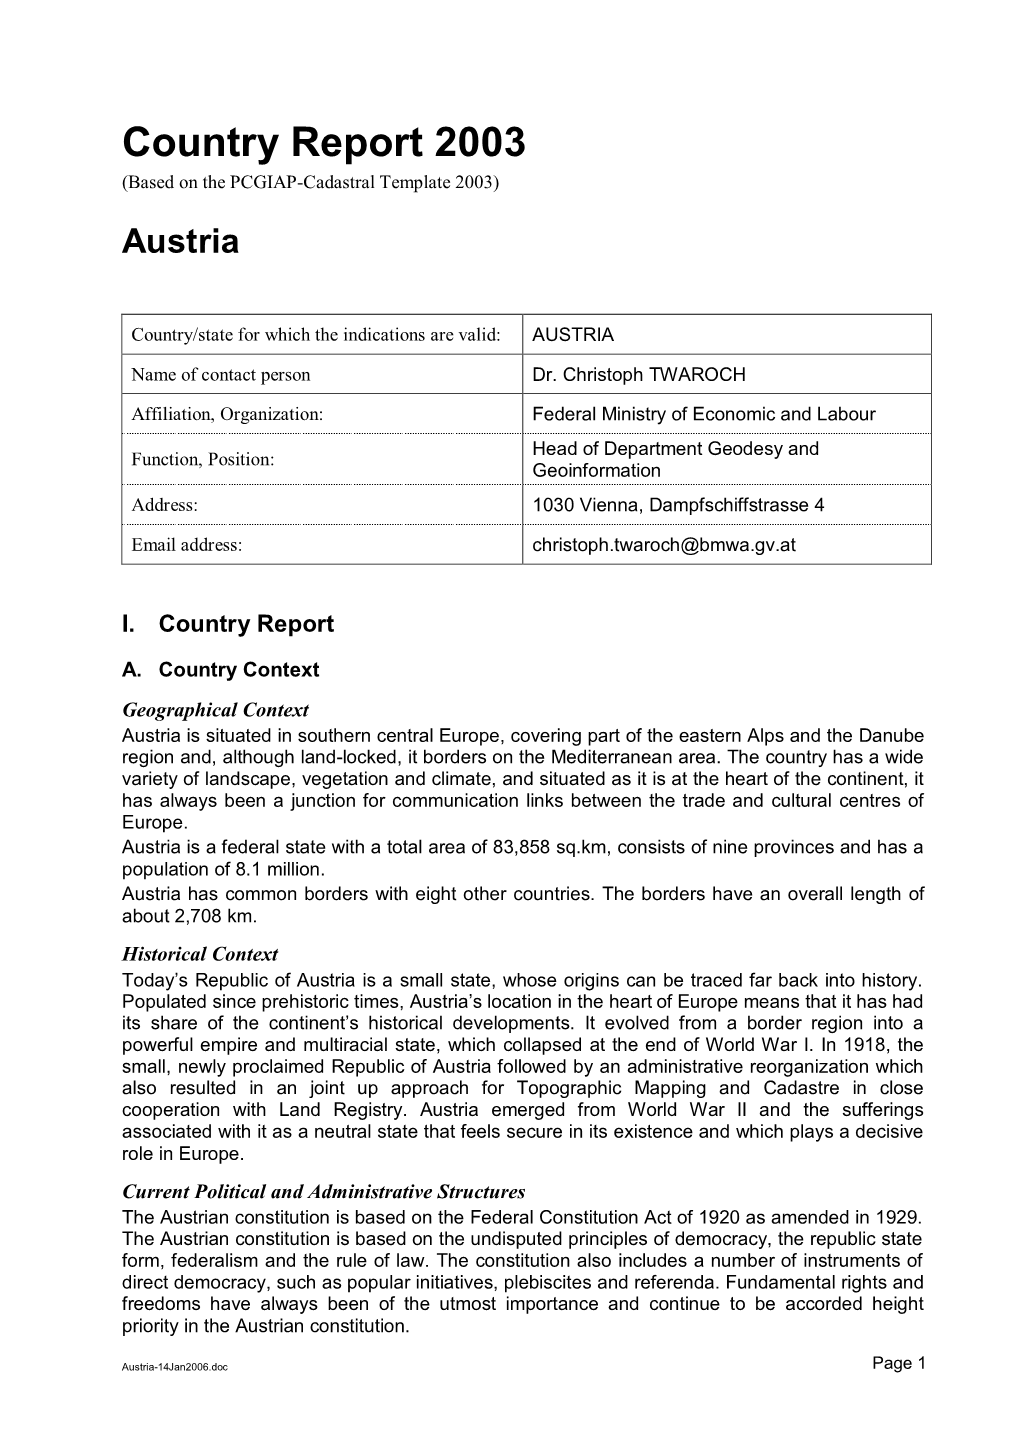 Country Report 2003 (Based on the PCGIAP-Cadastral Template 2003)